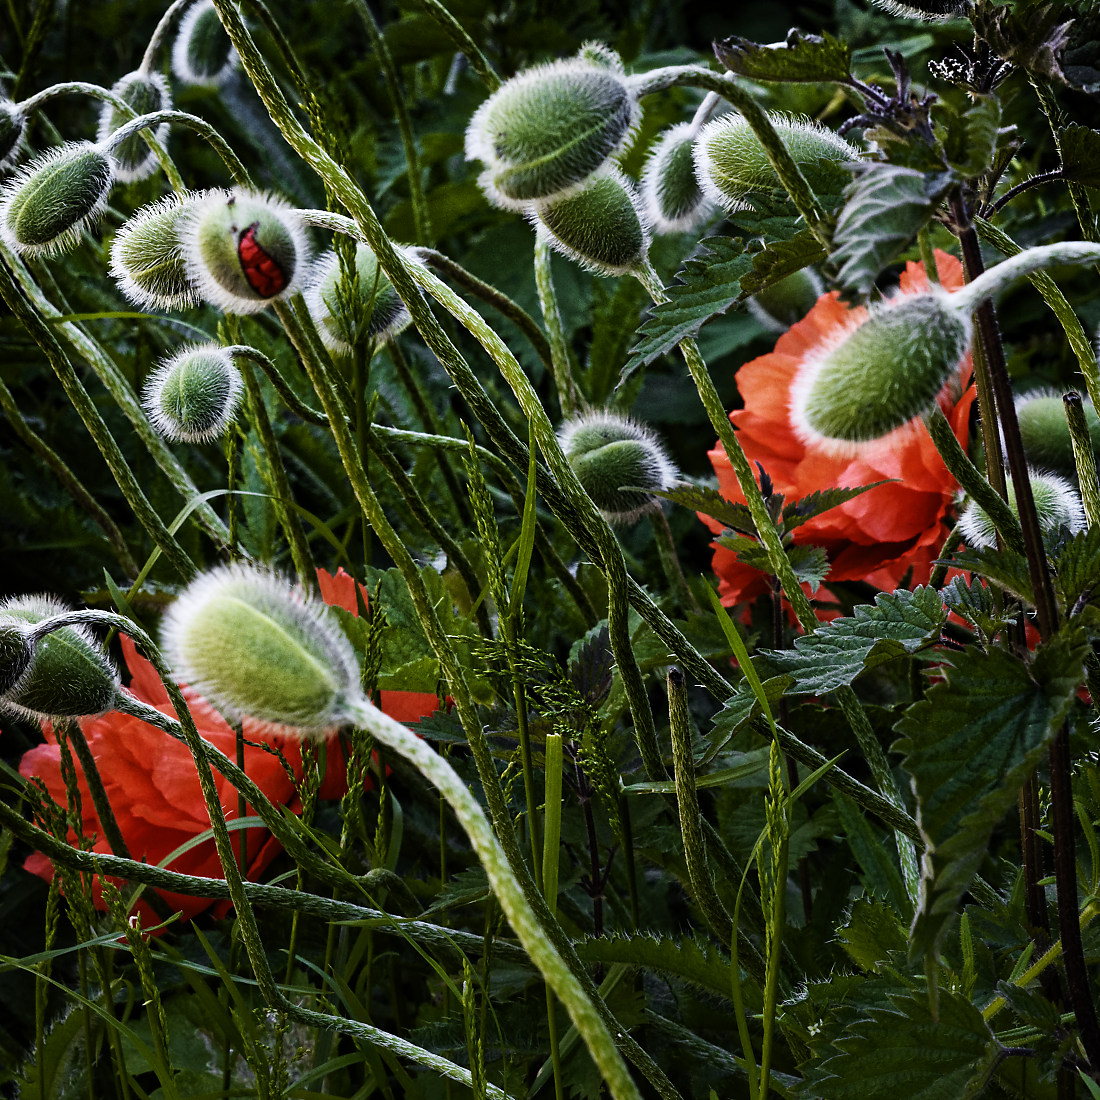 Buds of poppies